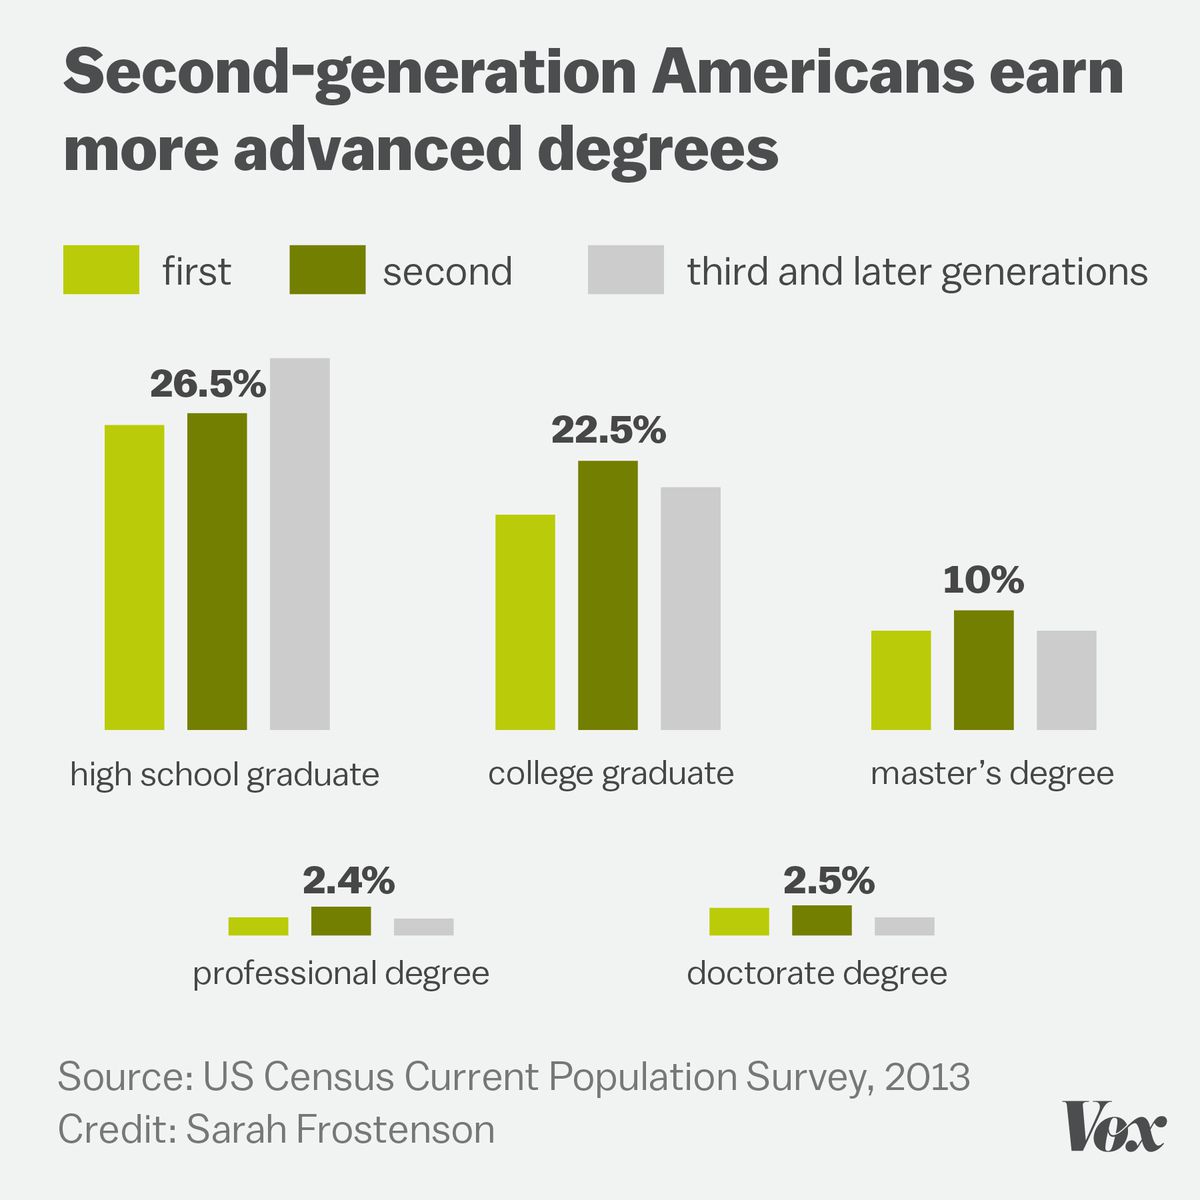 Chart showing that second-generation Americans earn the most advanced degrees